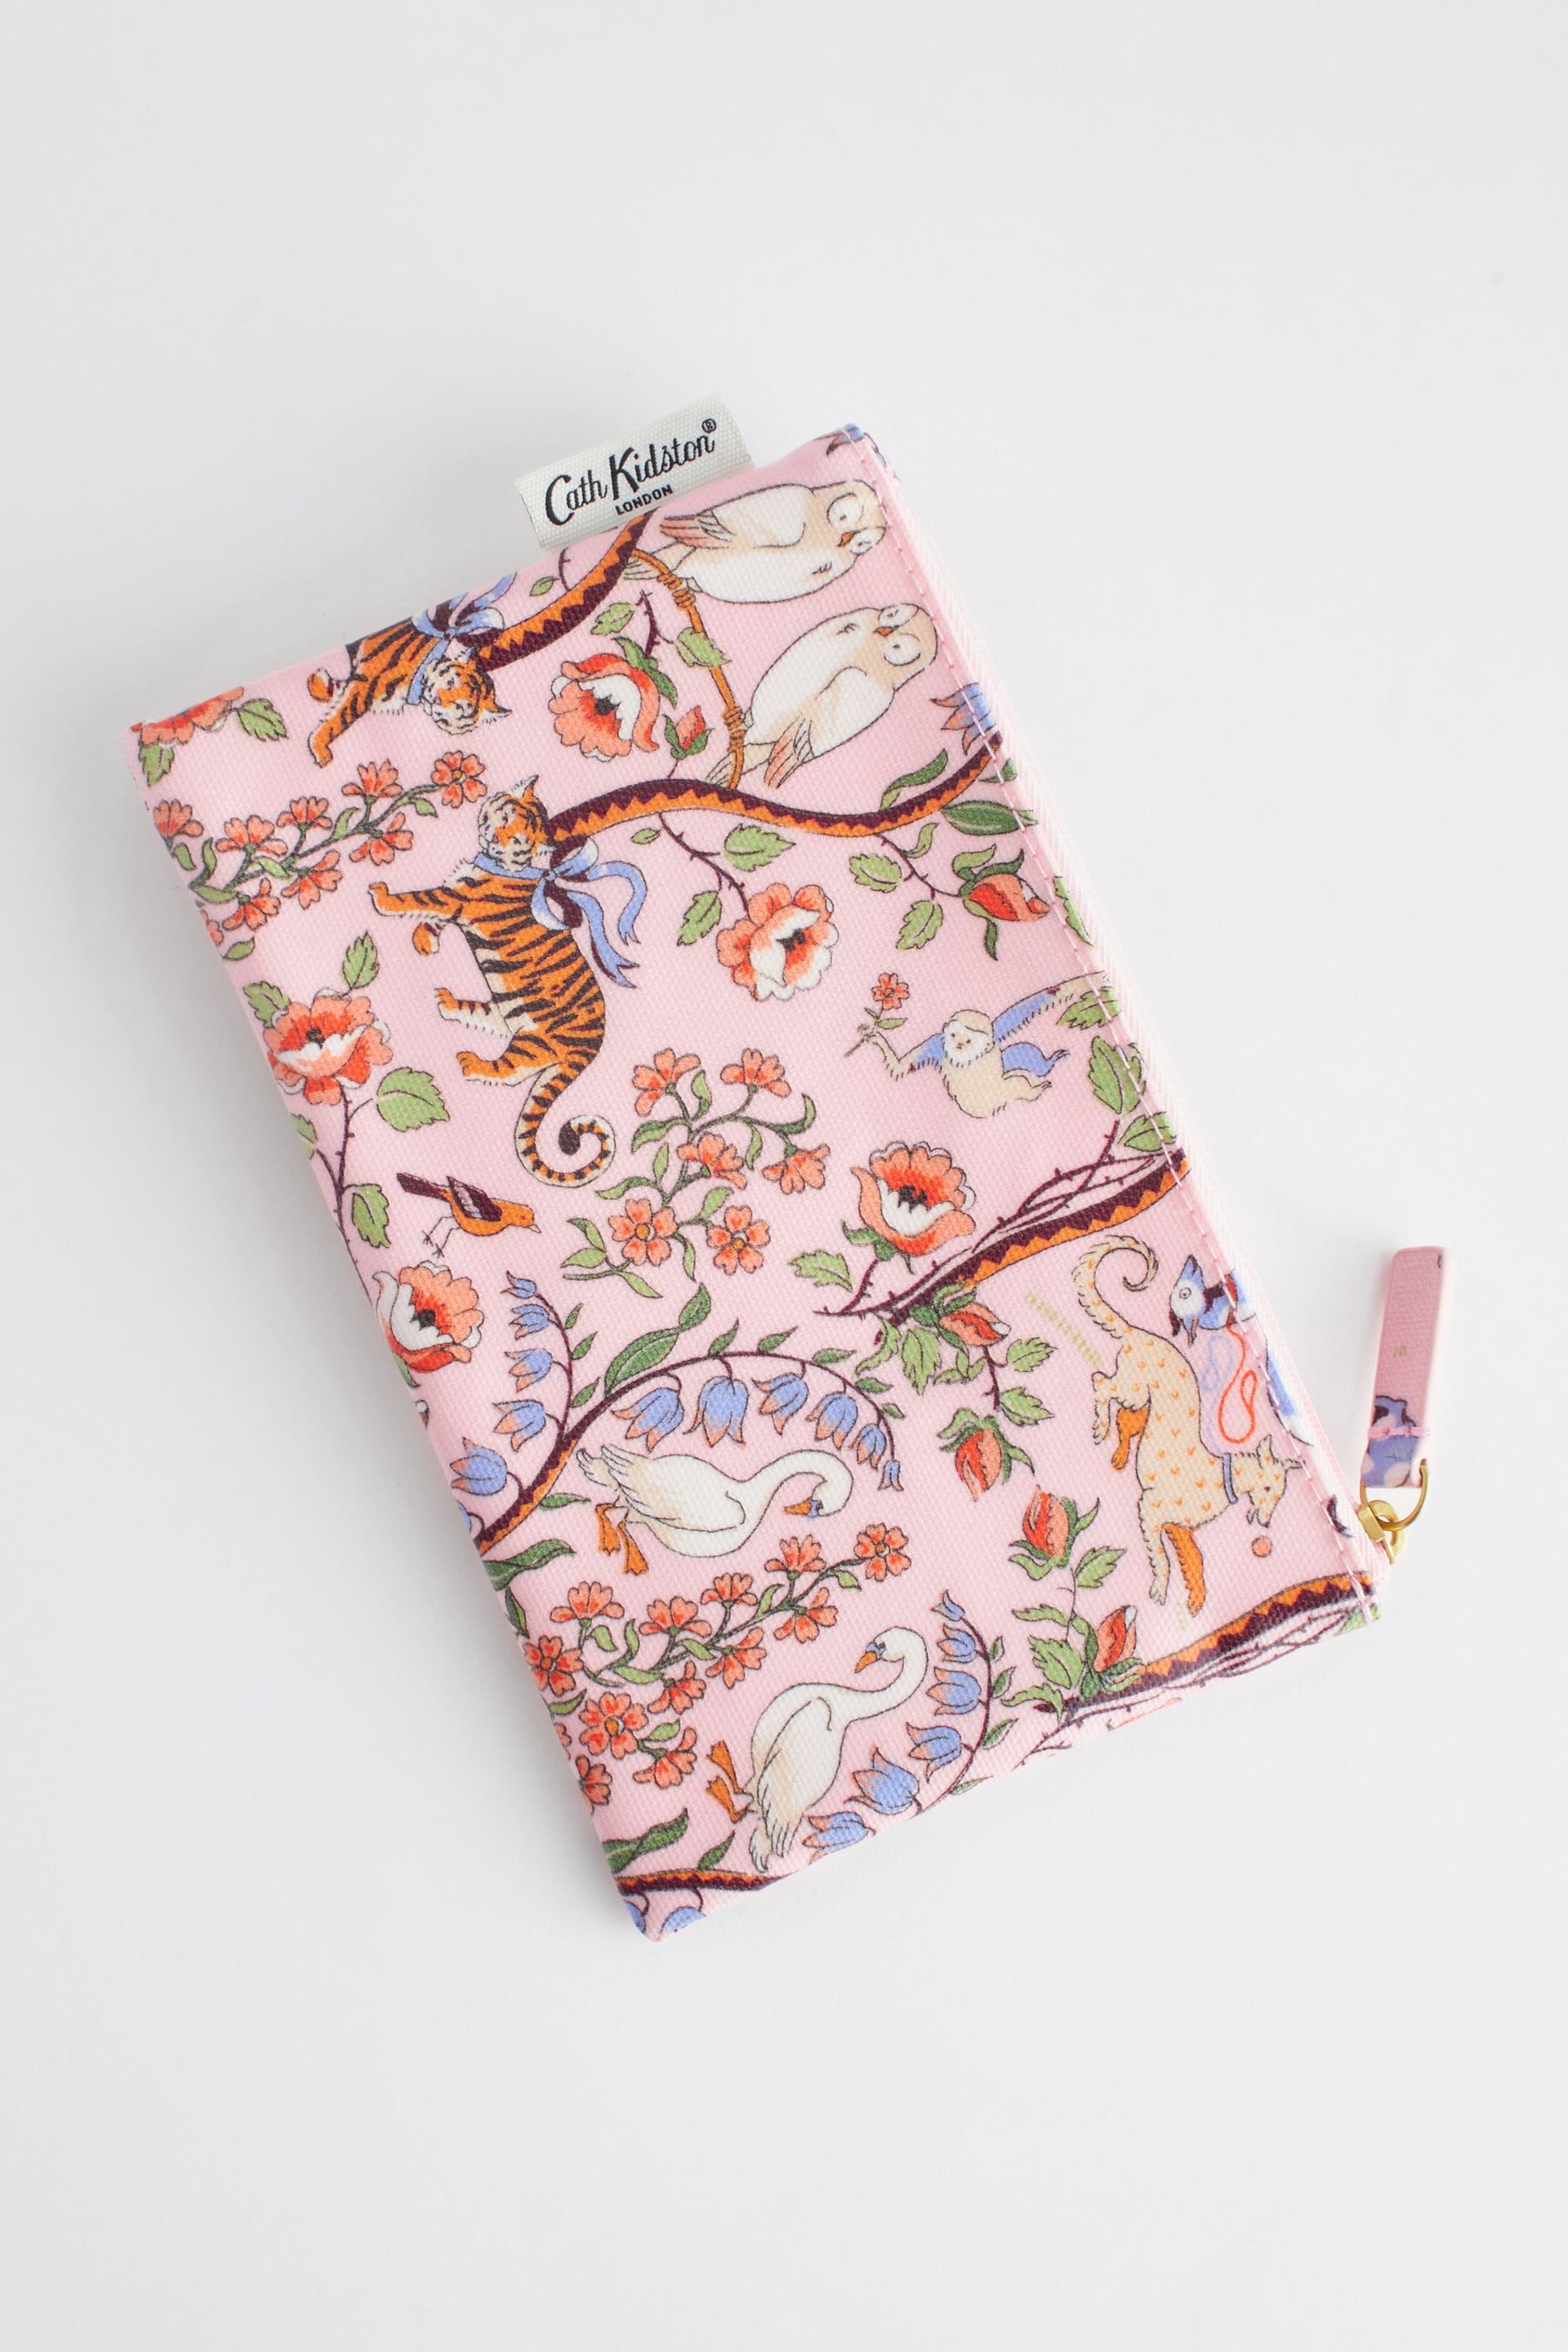 Cath Kidston Pink Floral Zipped Flat Purse - Image 1 of 3